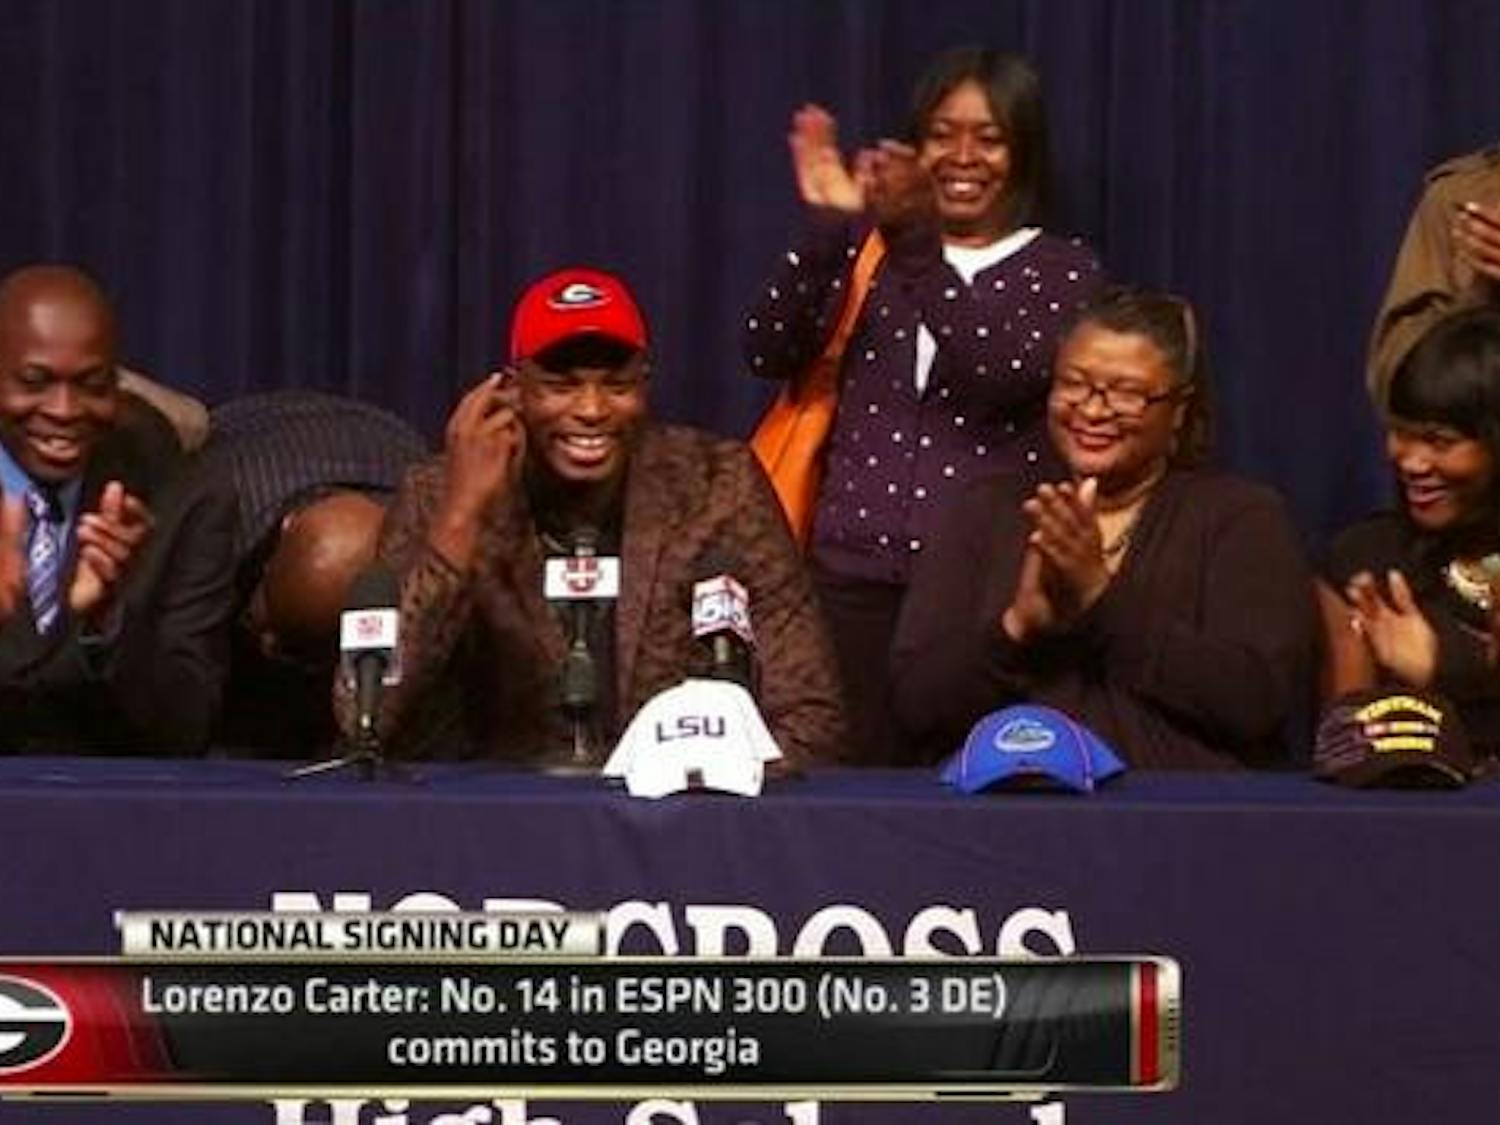 Four-star defensive end Lorenzo Carter selects Georgia over Florida and LSU during a ceremony at his high school, Norcross (Ga.) High, on Wednesday afternoon.